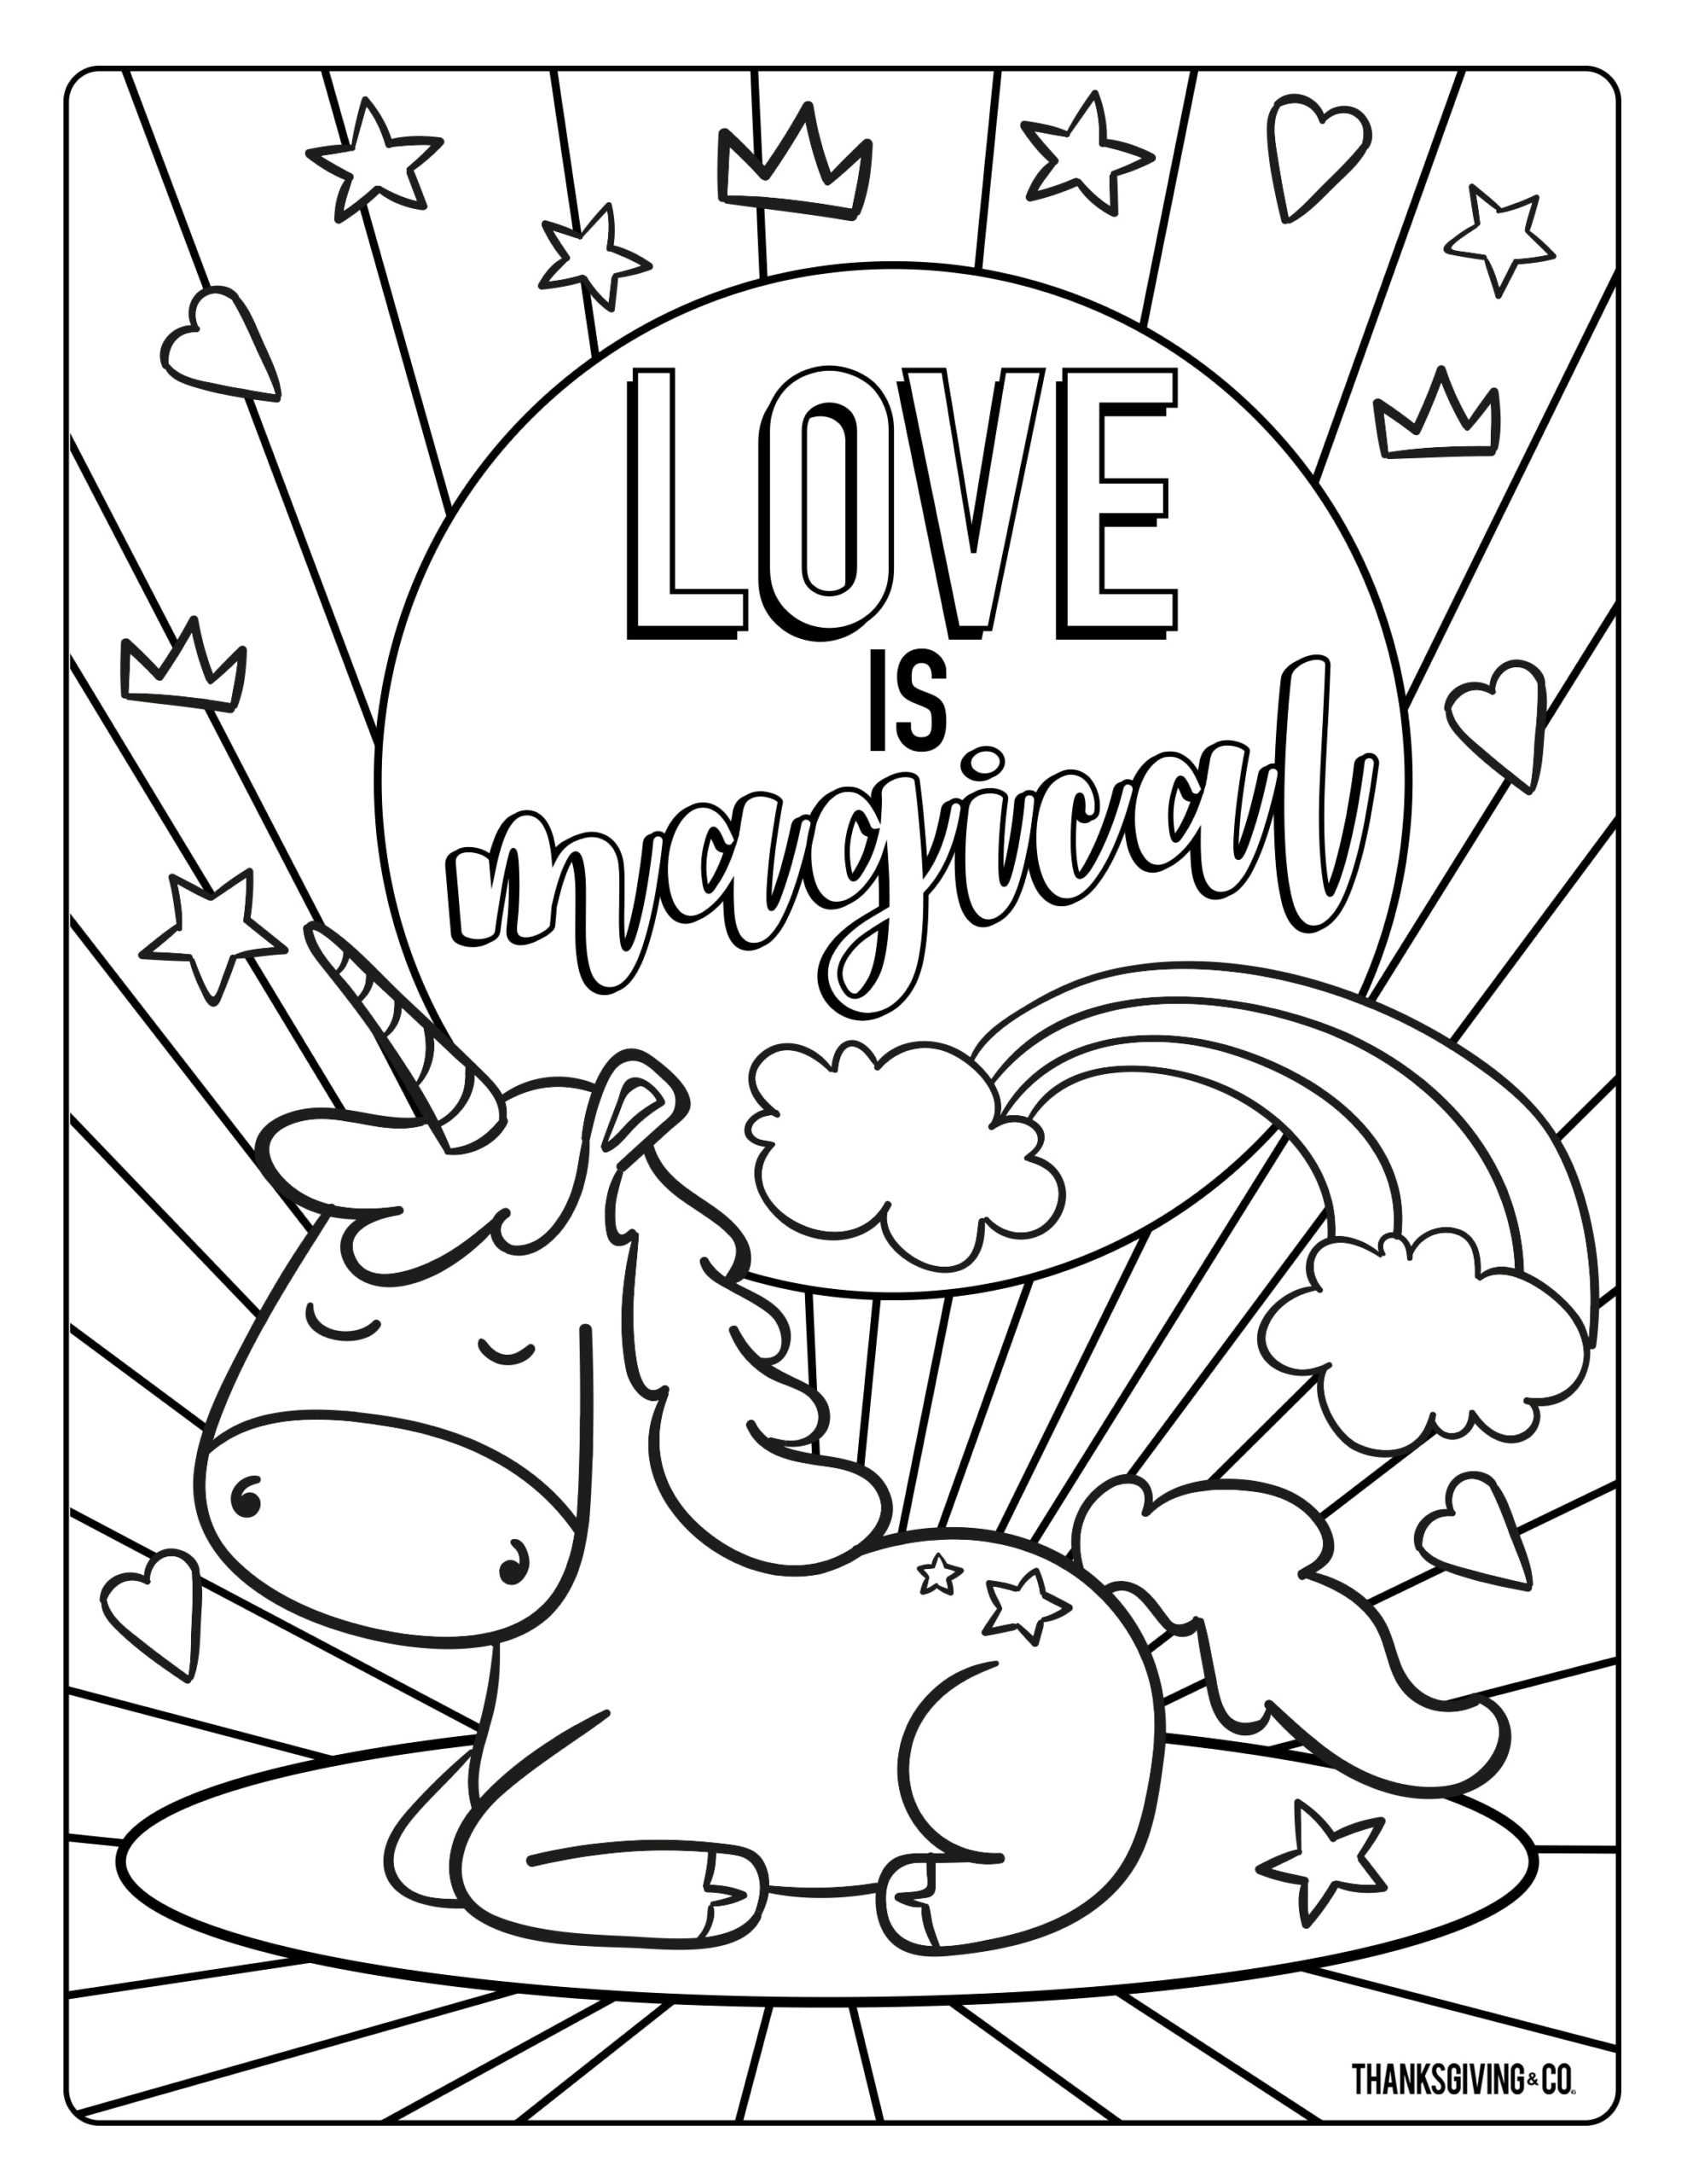 Coloring Book : Free Valentines Day Coloring Pages For Kids ...